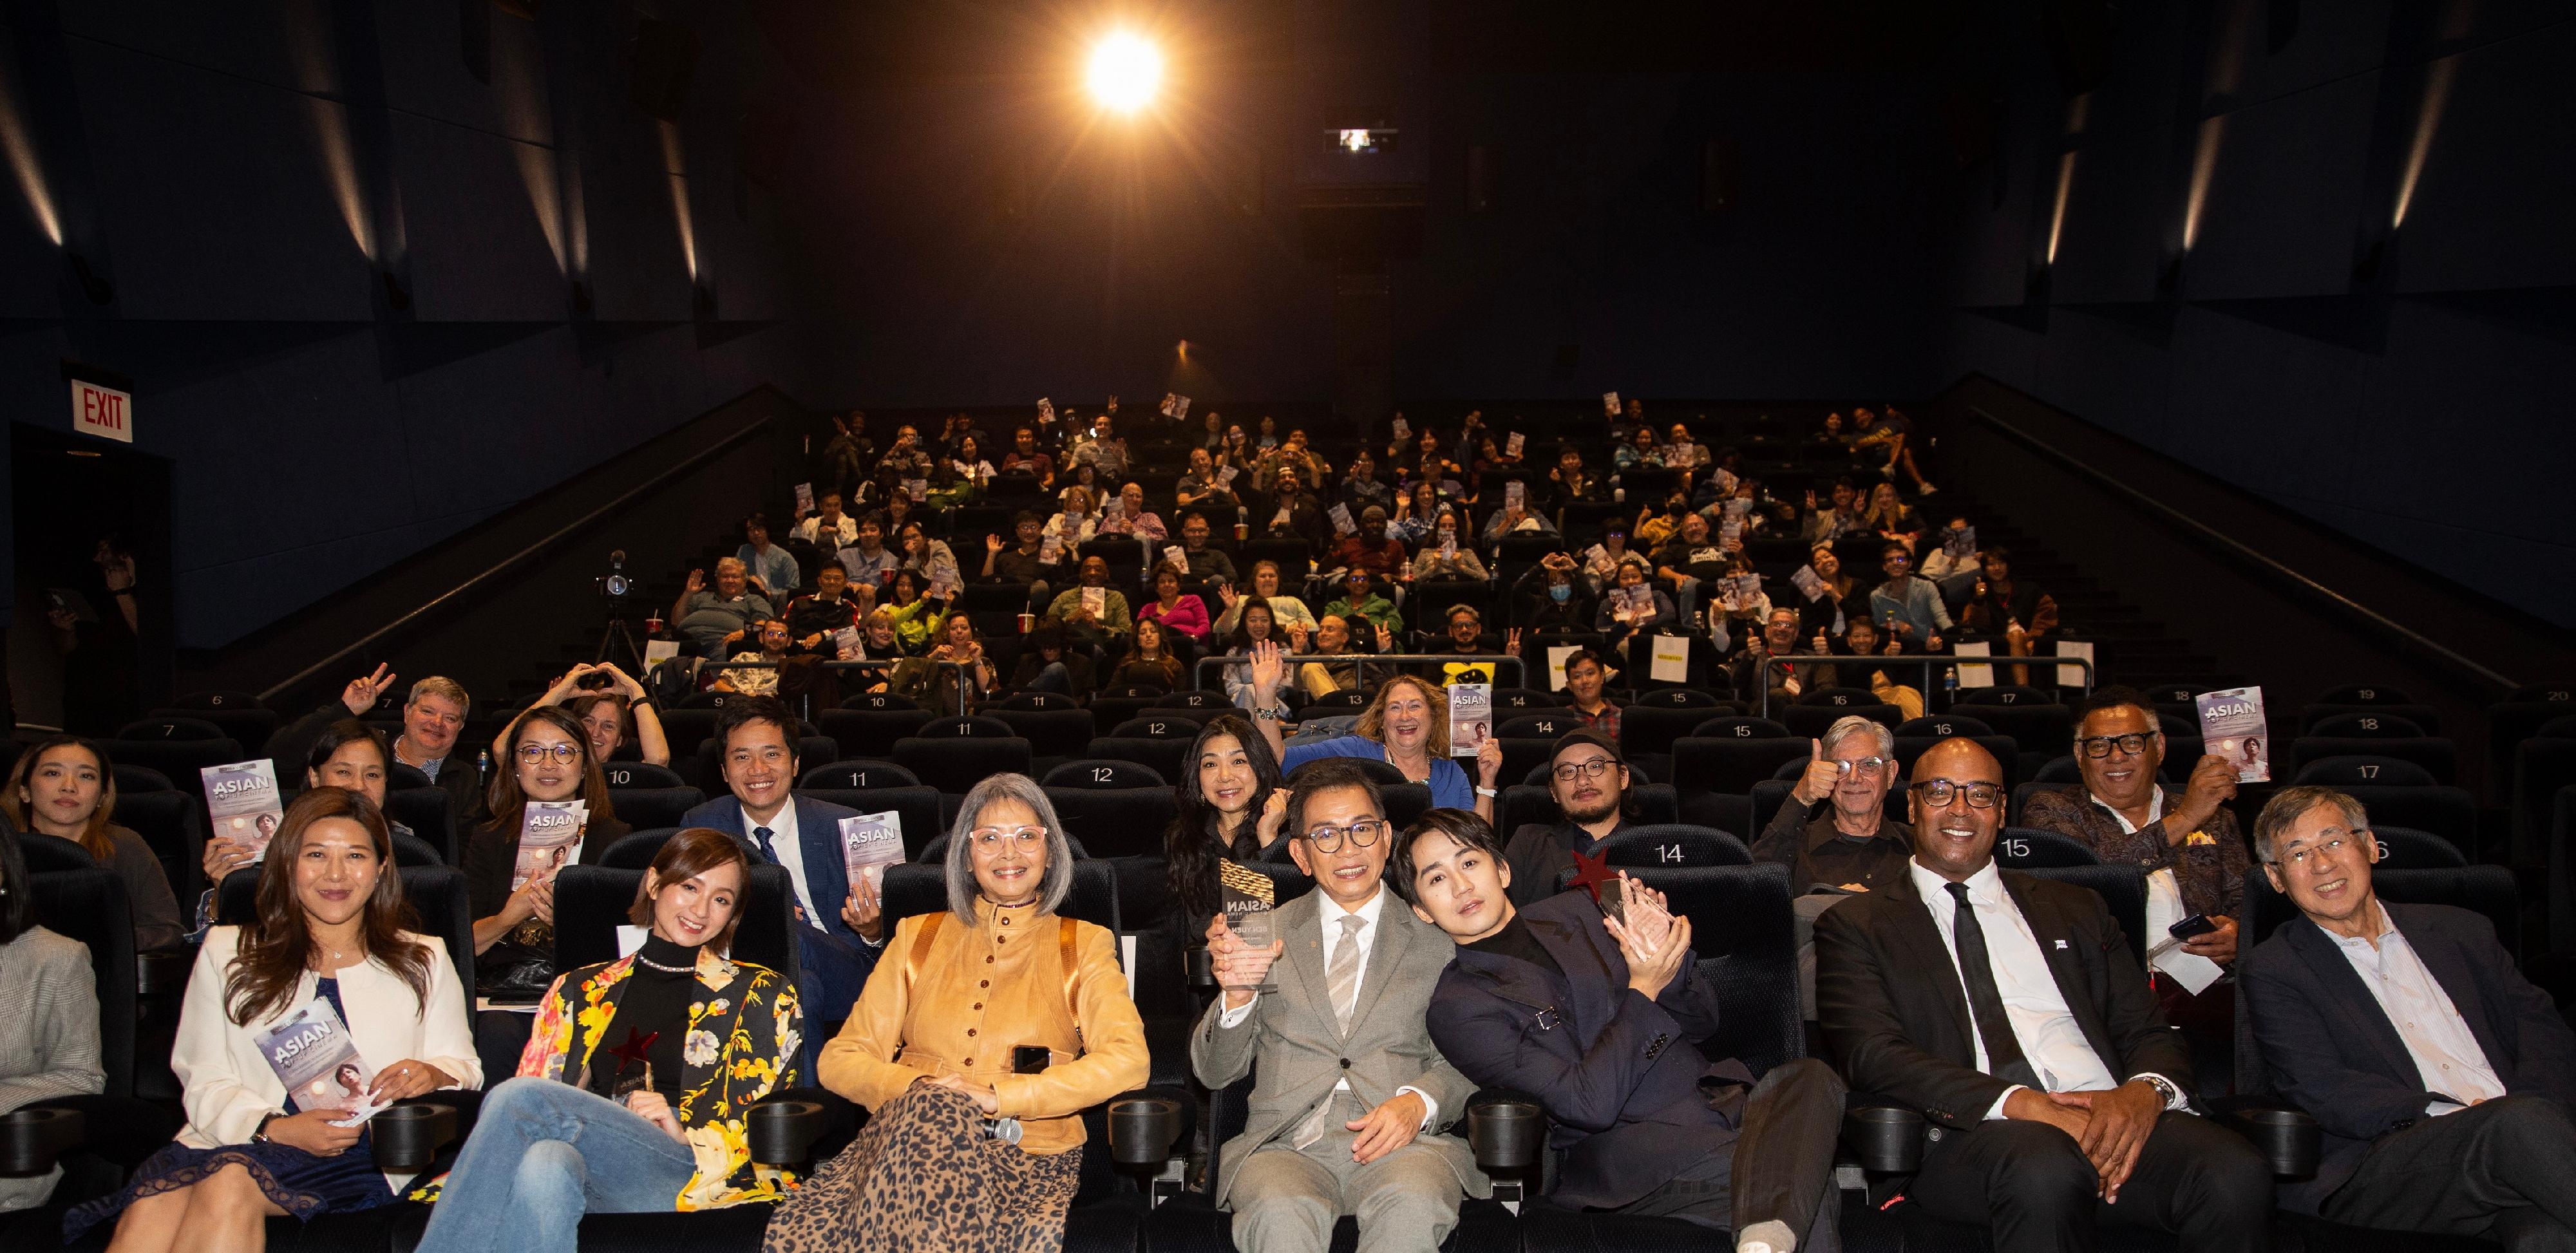 Several Hong Kong film talents across different generations were recognised for their outstanding achievement and contribution to the industry at the awards presentation ceremony of the Asian Pop-Up Cinema (APUC) Season 17 in Chicago on September 16 (Chicago time). Photo shows the award winners and officiating guests with the audience at the international premiere of "Stand Up Story".